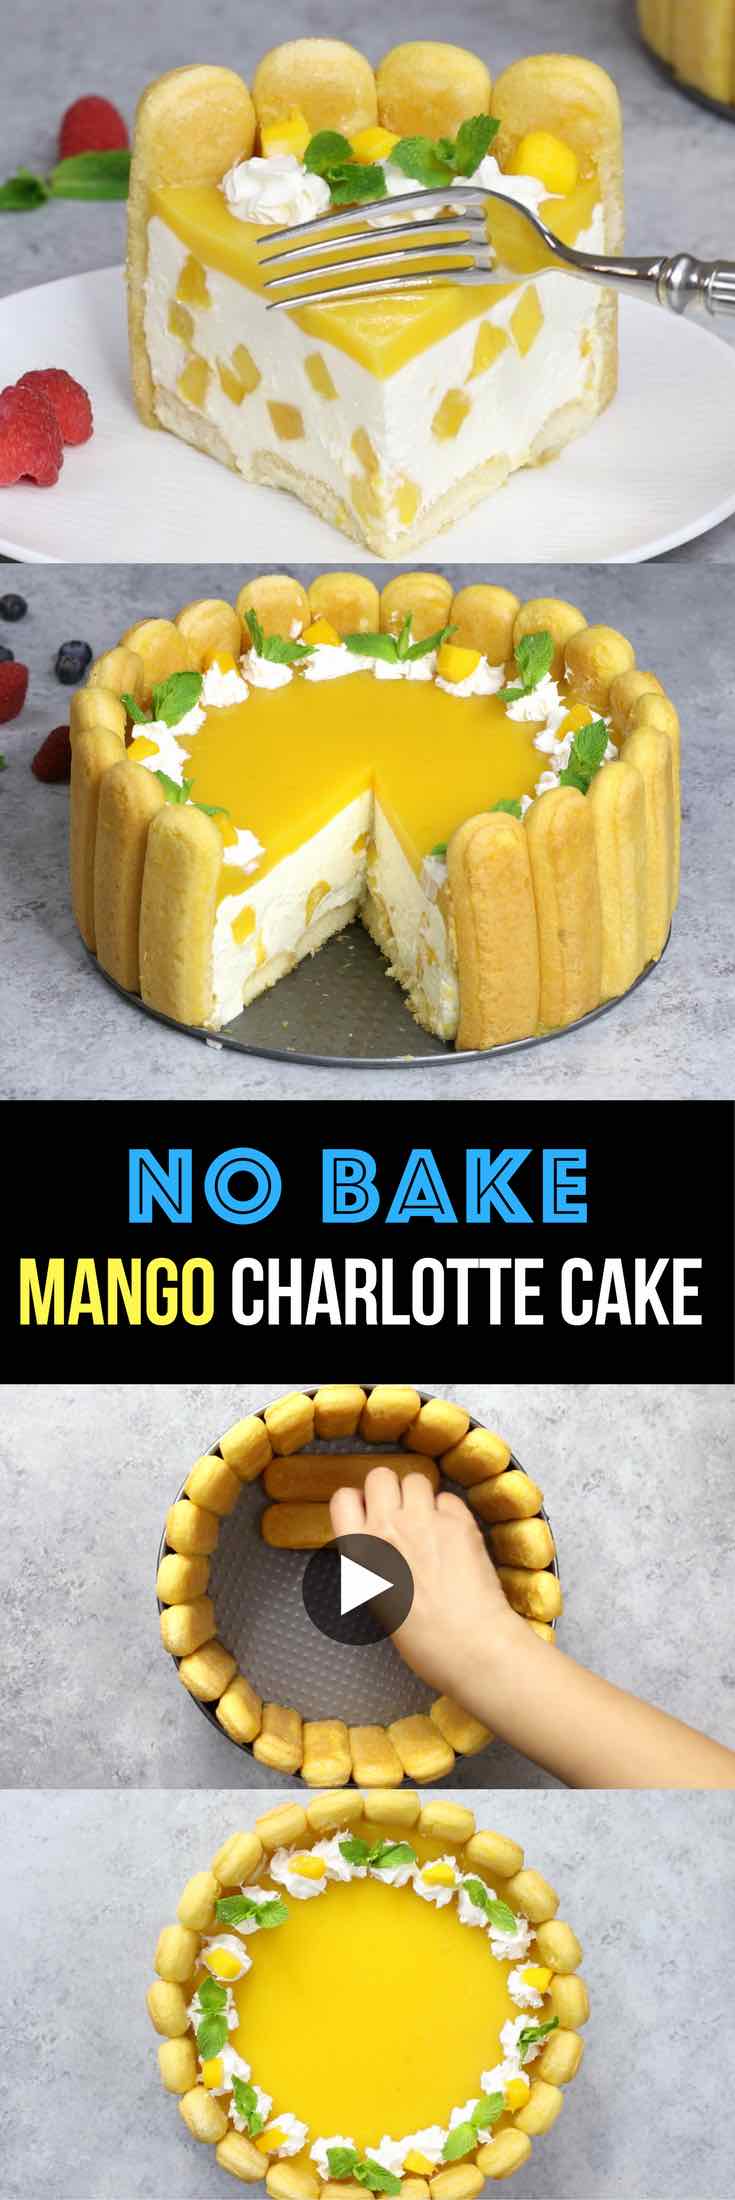 No Bake Mango Charlotte Cake – the most beautiful and unbelievably delicious mango cheesecake. All you need is some simple ingredients: mango juice, ladyfingers, cream cheese, sugar, whipped cream, mango, gelatin, and rum or triple sec. So Good! Perfect for a holiday party or a special occasion such as birthday and Mother’s Day! No bake cheesecake. Dessert recipe. Vegetarian. Video Recipe | Tipbuzz.com